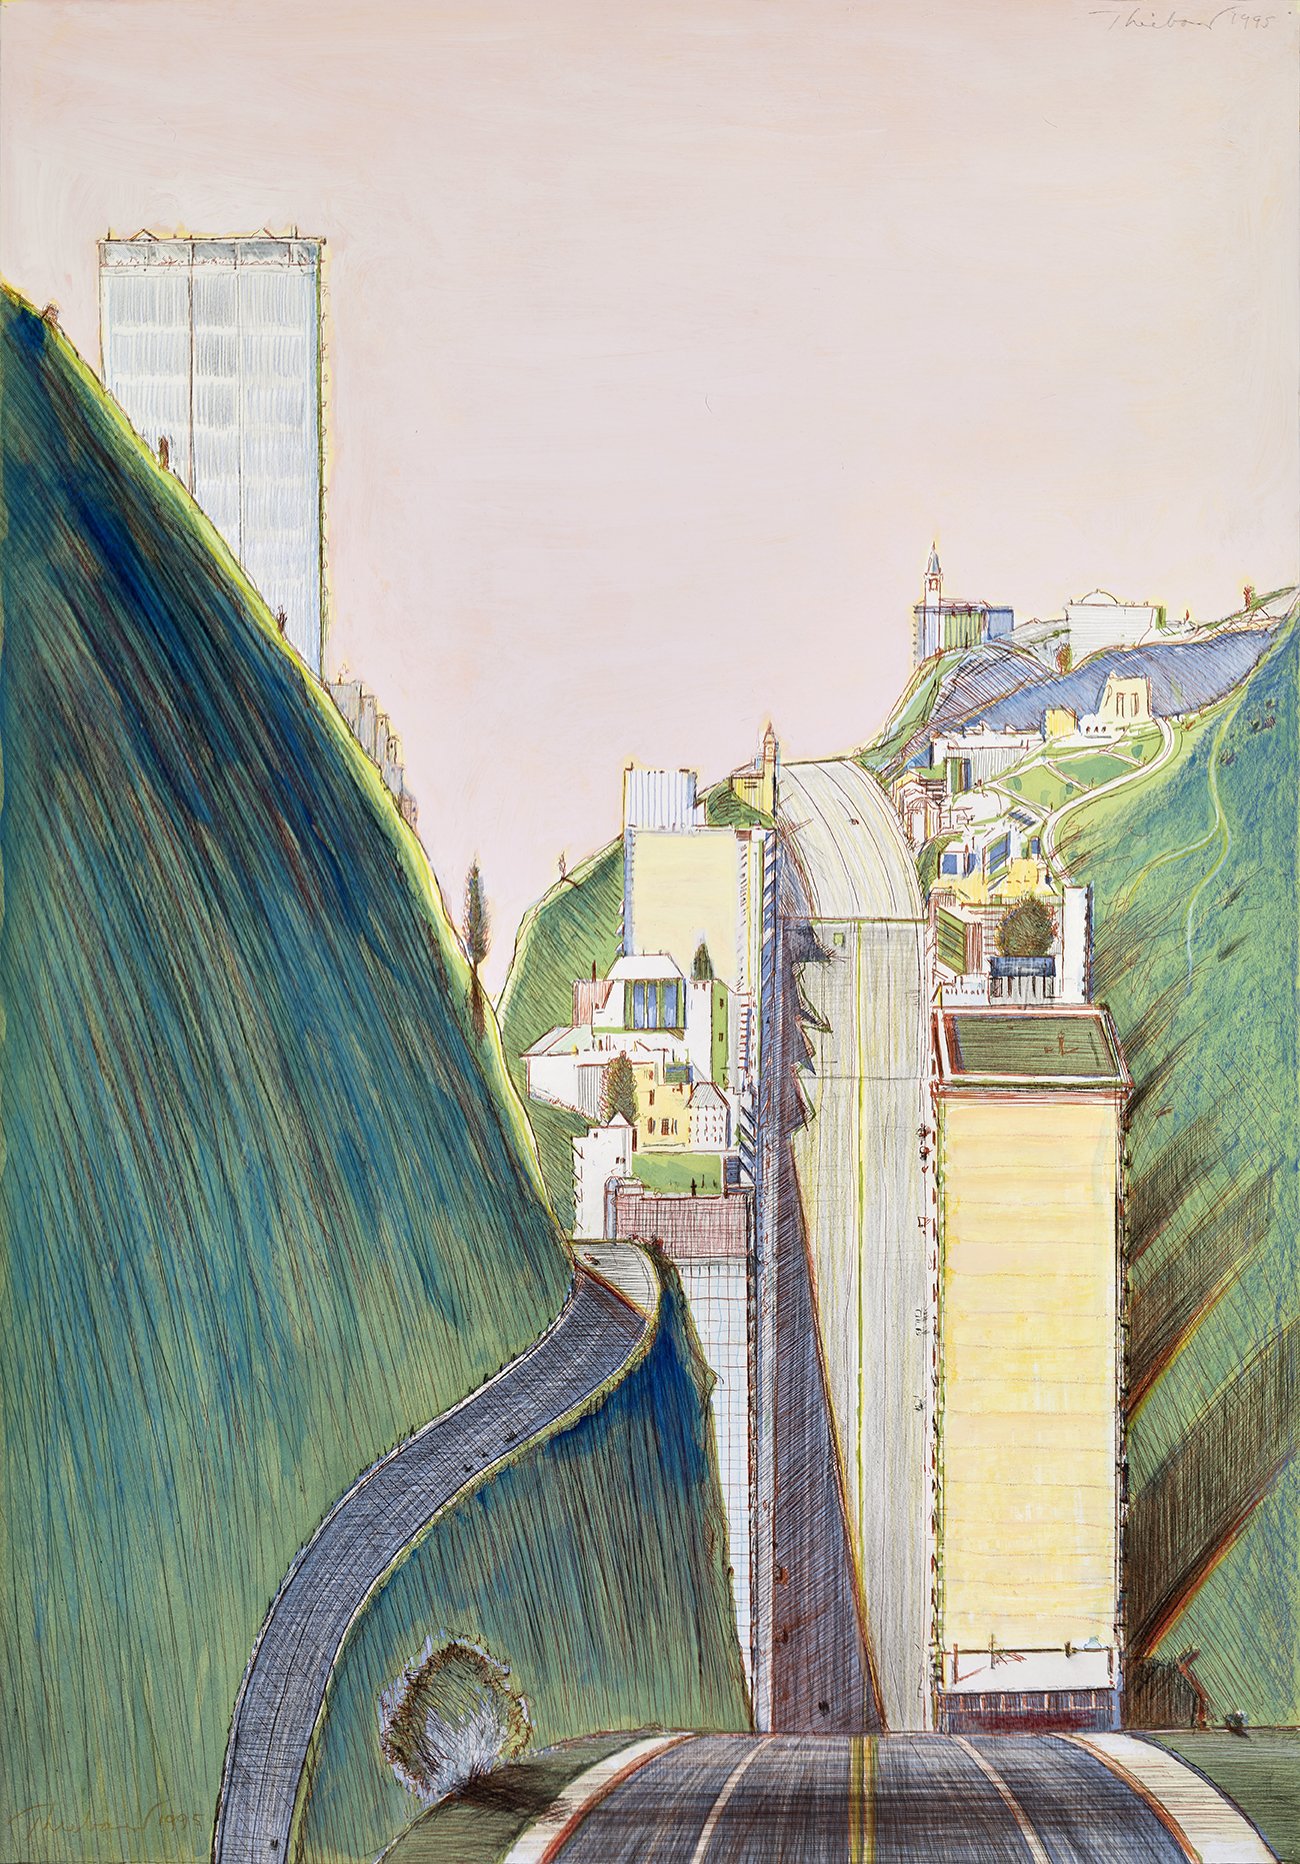 Wayne Thiebaud, Park Place, 1995. Color etching hand-worked with watercolor, gouache, colored pencil, graphite, and pastel, 29 9/16 x 20 3/4 in. (sheet/image). Crocker Art Museum, gift of the Artist’s family, 1995.9.50. © 2021 Wayne Thiebaud / Licensed by VAGA at Artists Rights Society (ARS), NY.